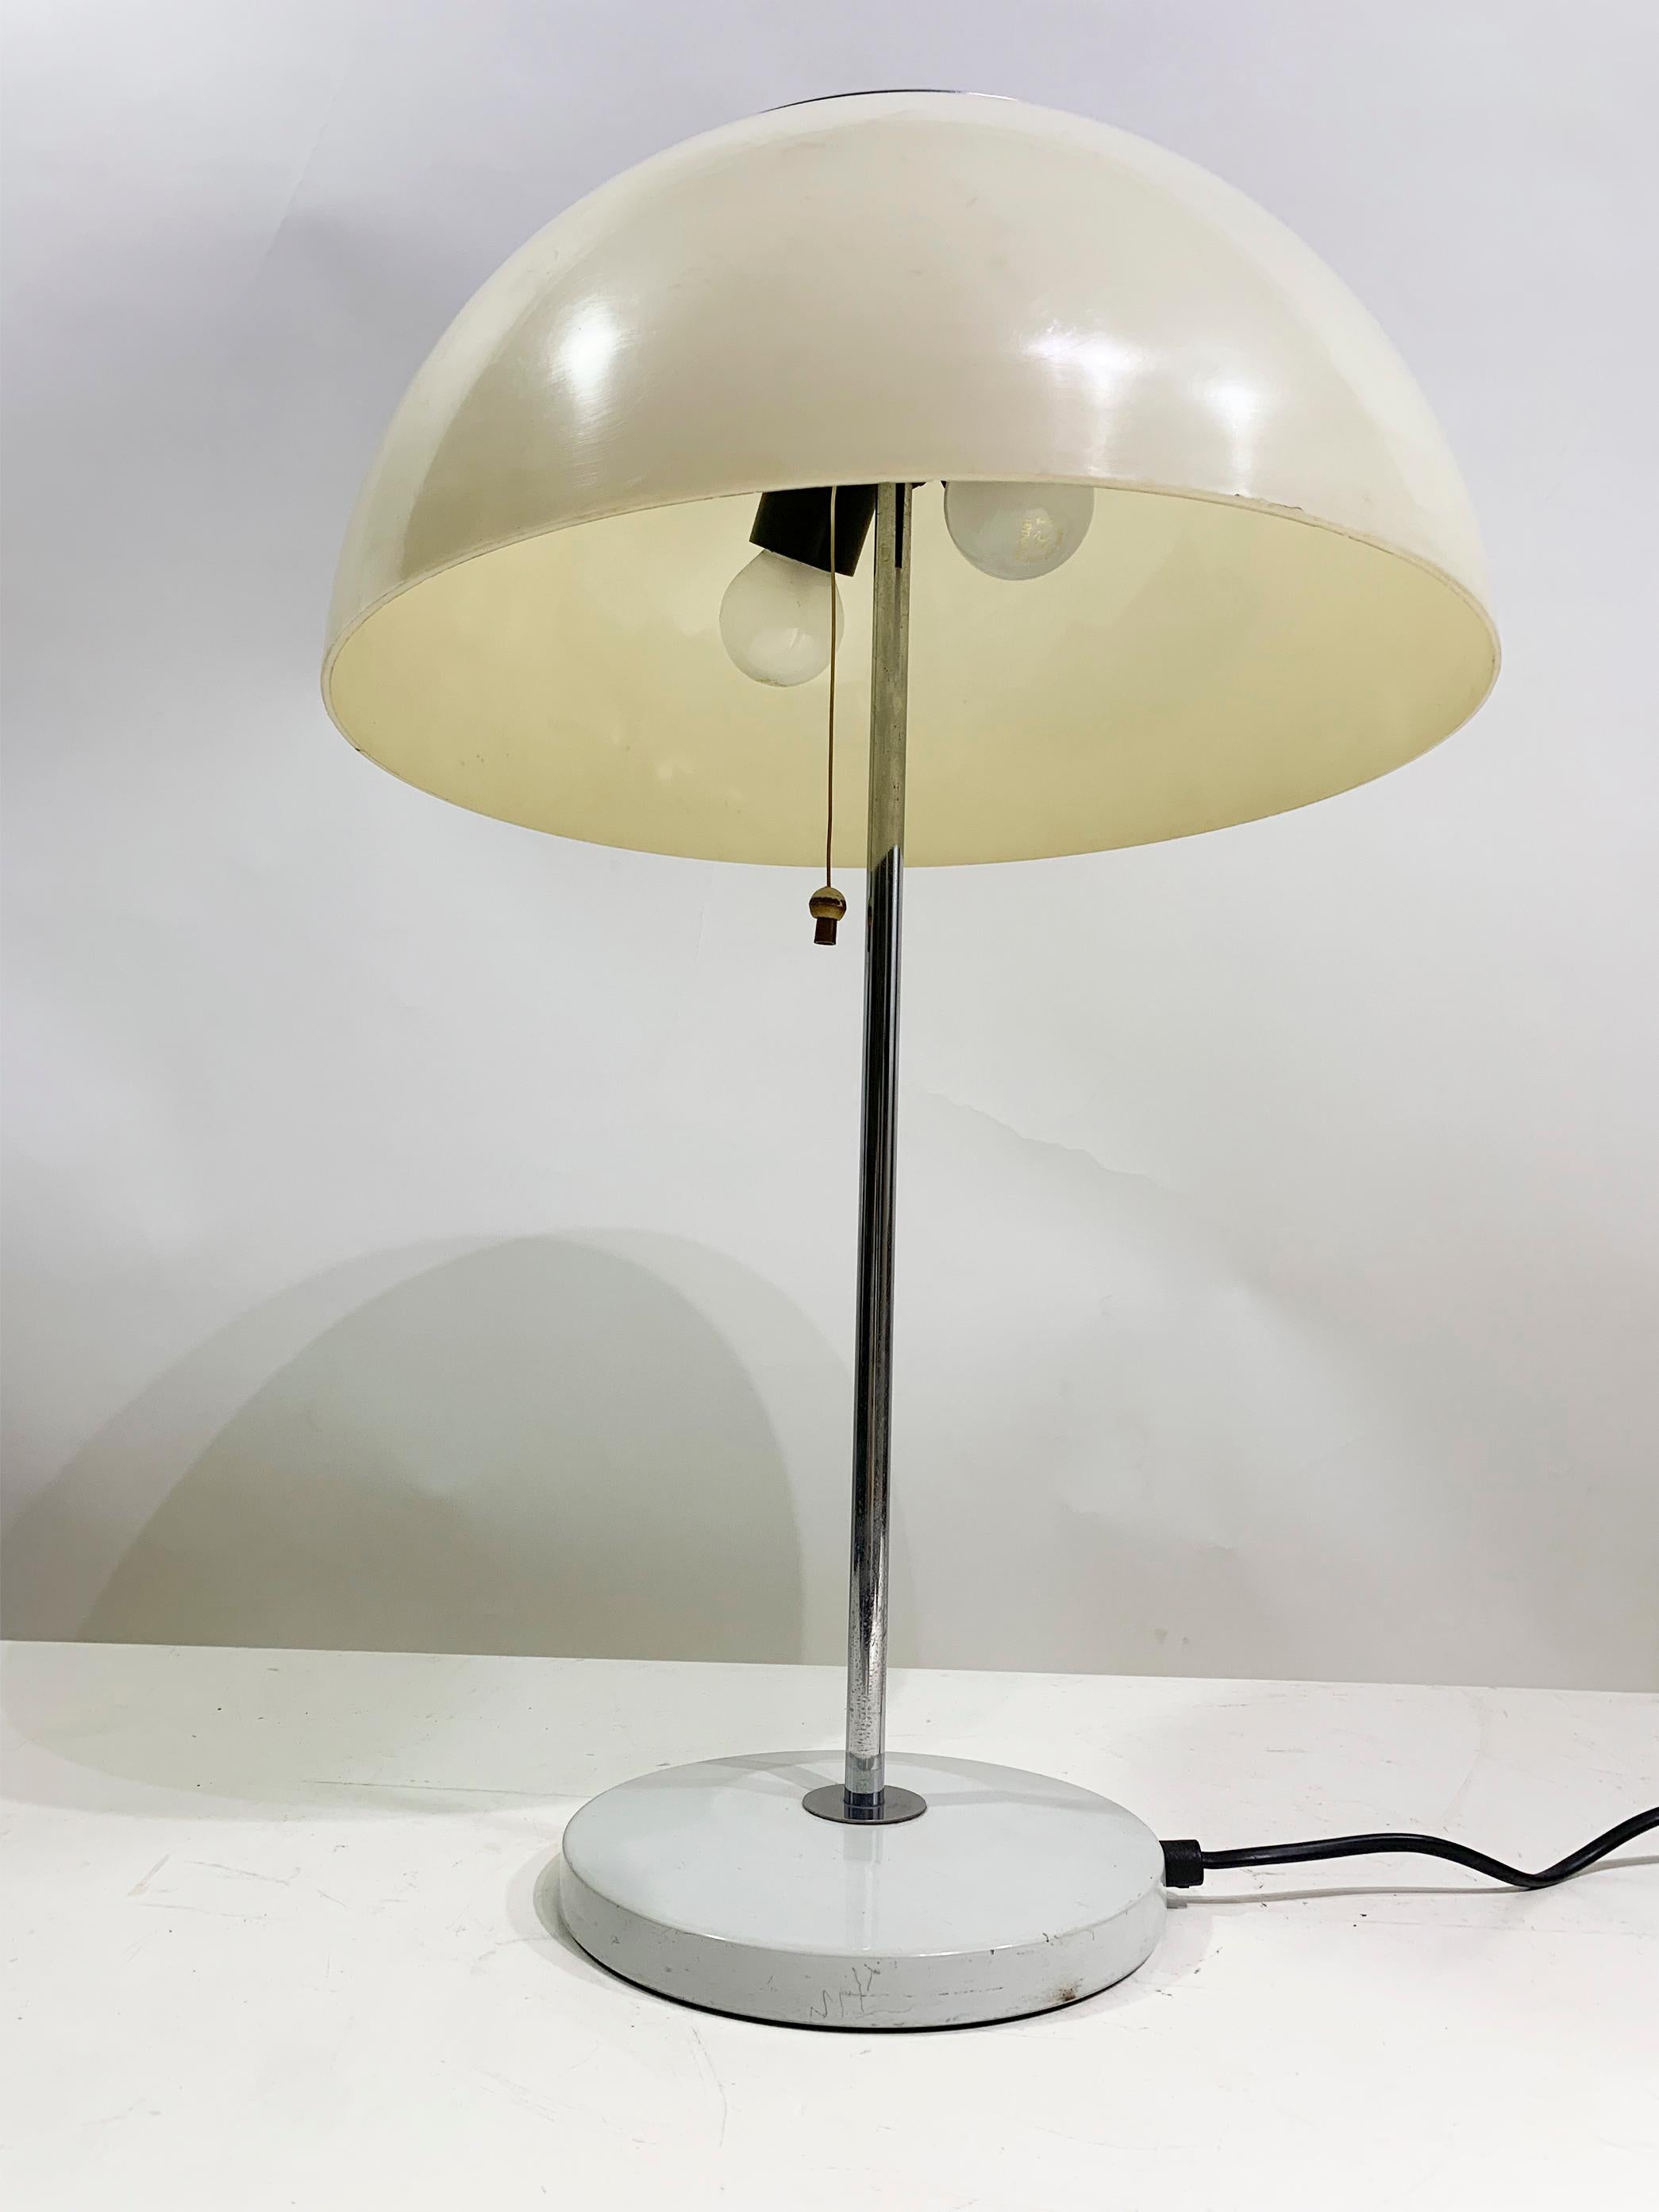  This exquisite antique mushroom lamp from the 1970s, crafted by Unilux.
With a lampshade made from a rich, cream-colored polypropylene. The base is constructed from a lustrous chromed metal, adding a touch of sophistication.
The lamp operates via a